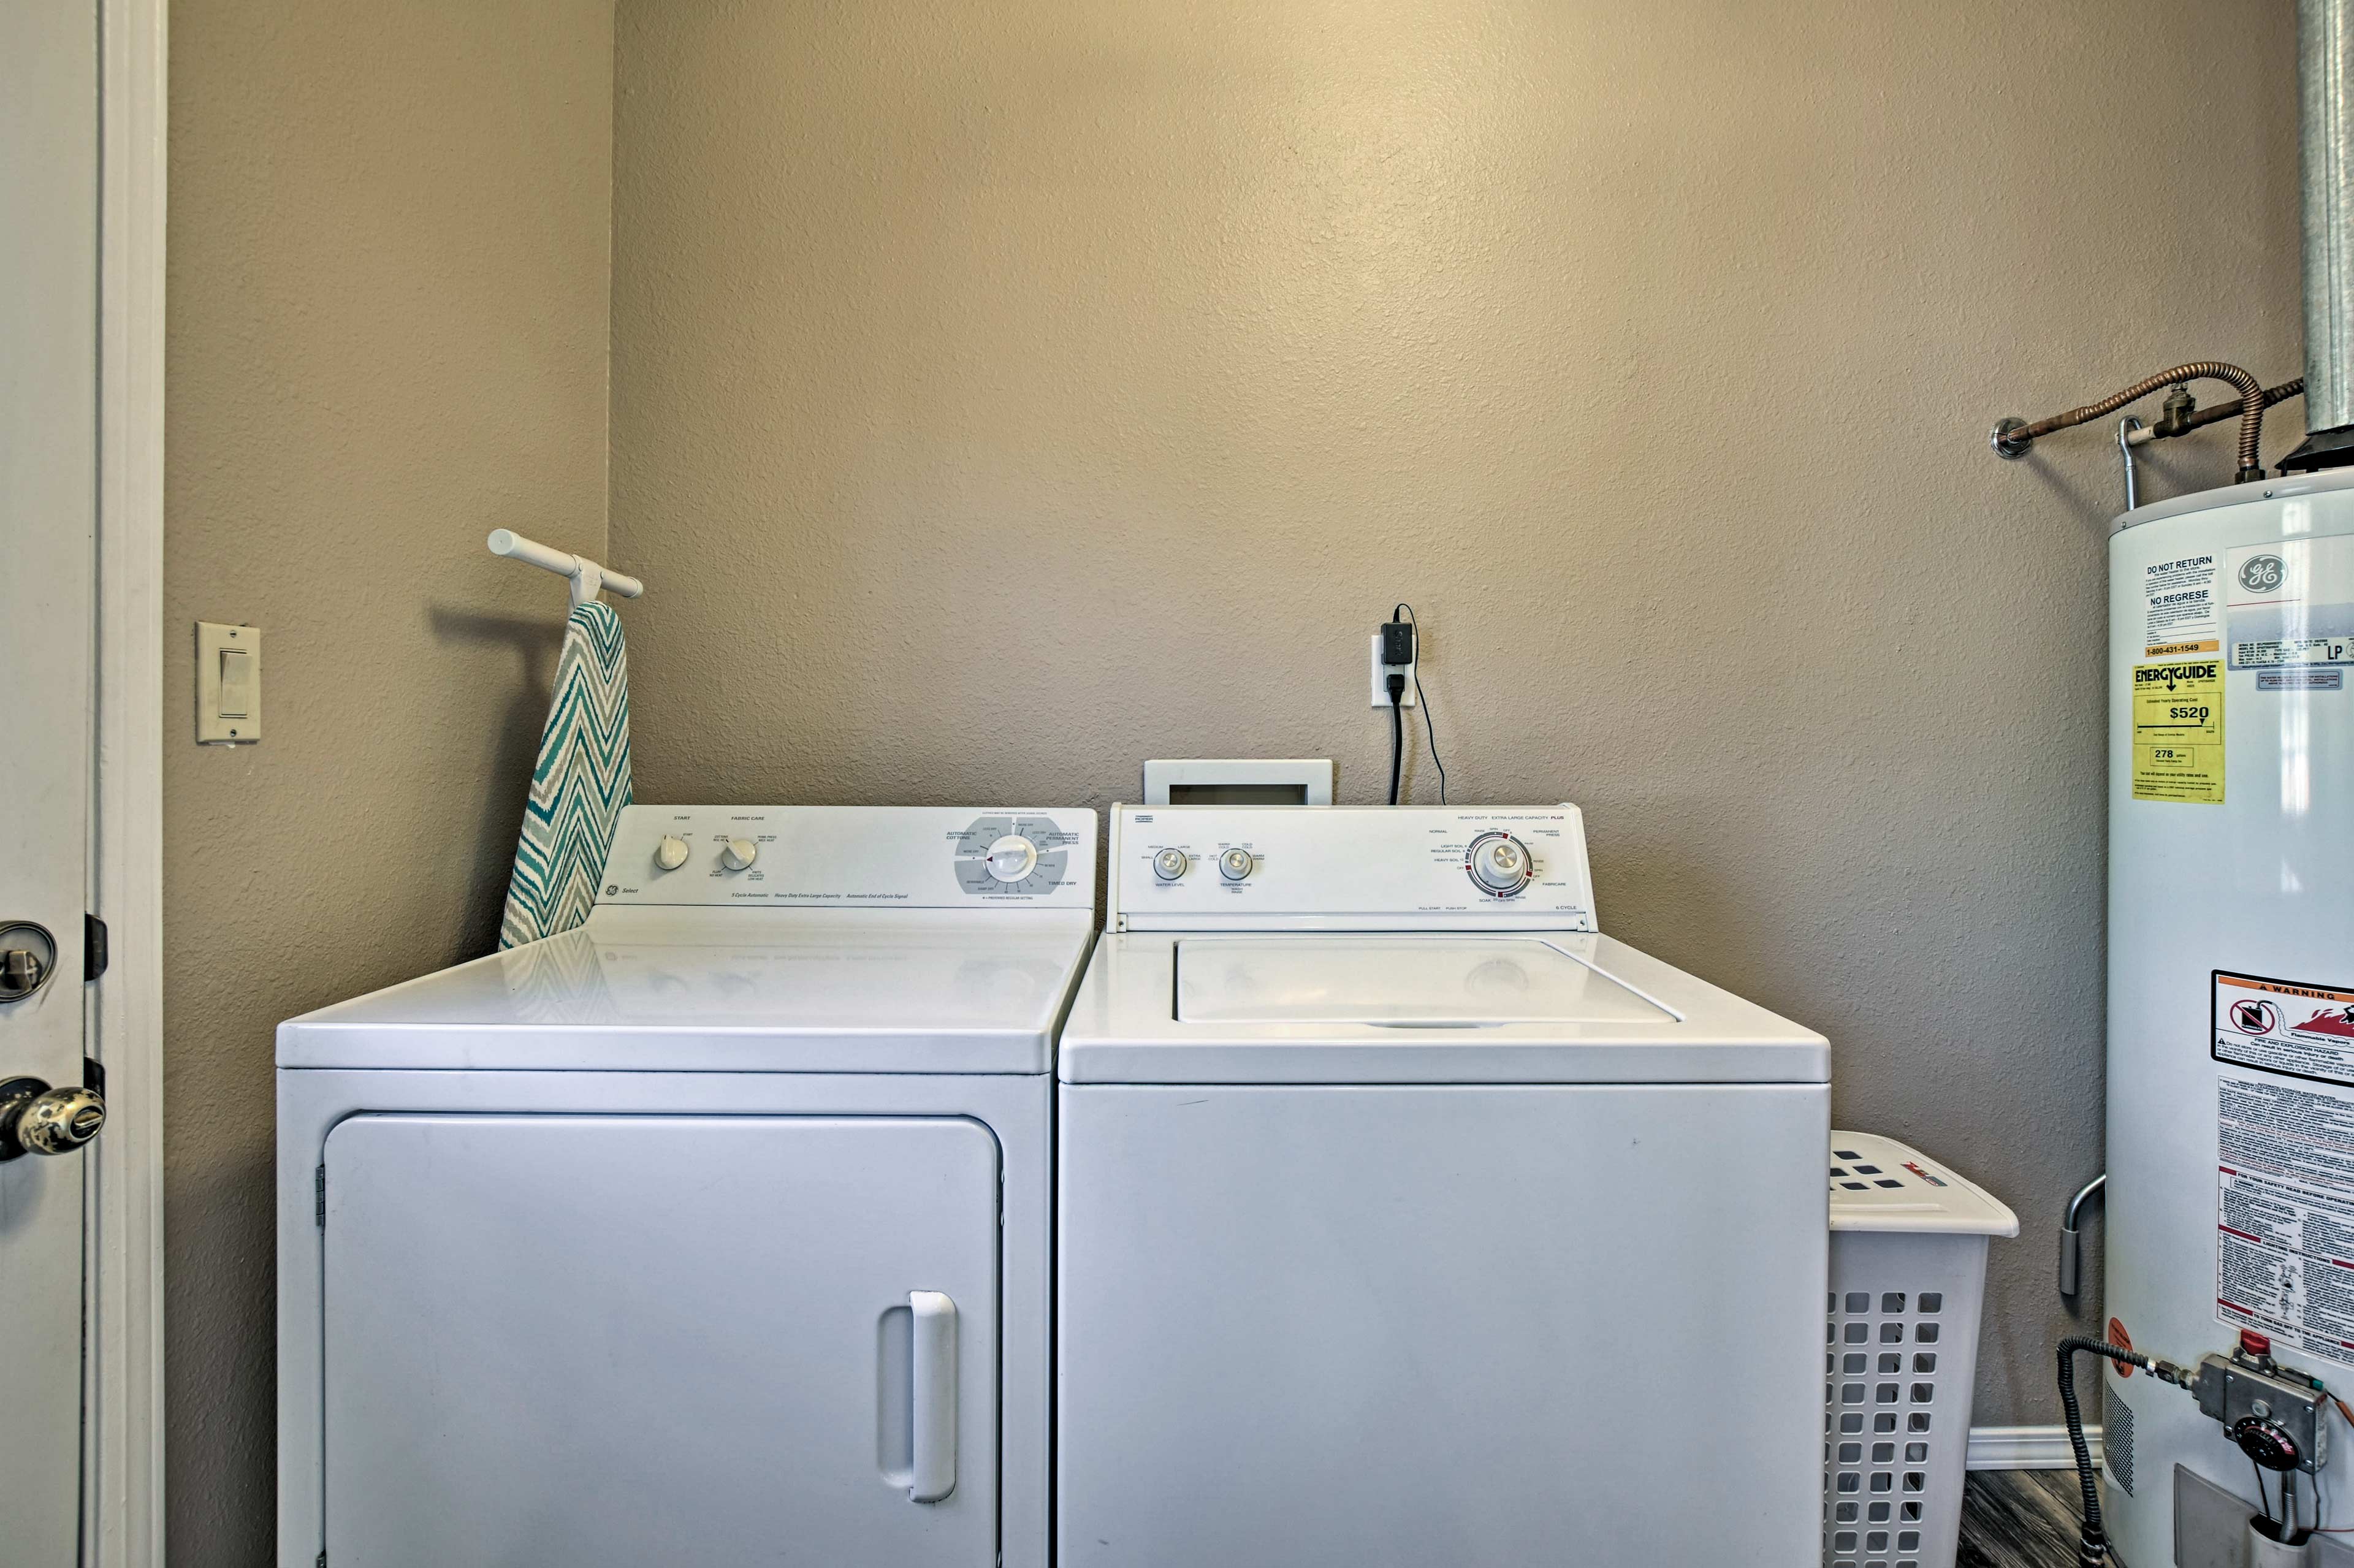 Keep your clothes fresh with the washer and dryer.